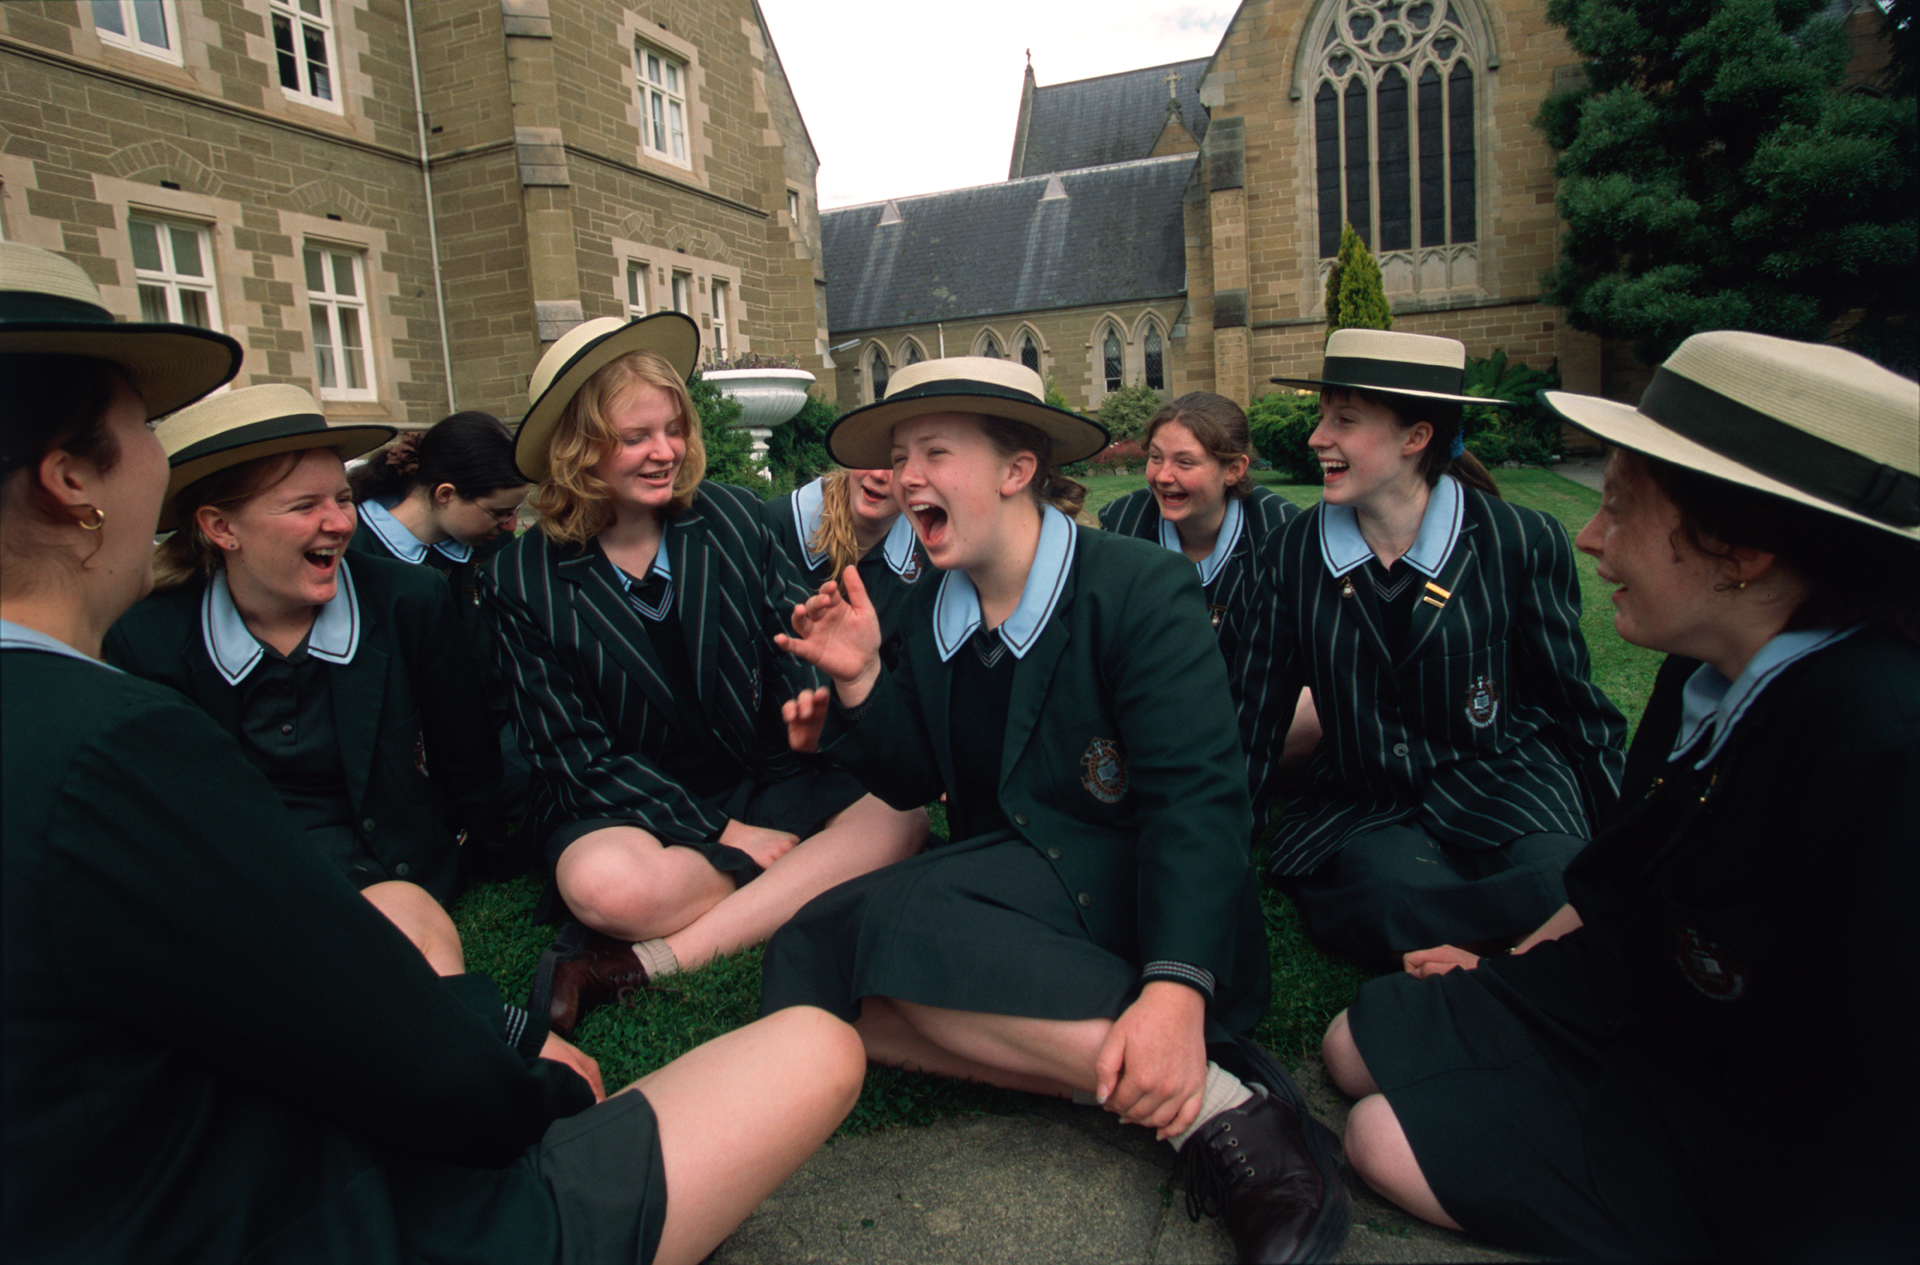  Looking forward to the Christmas/Summer break, a group of students at St. Mary's College, a Catholic High School for girls in Hobart gather on the College lawn during their last day of school.  Hobart  